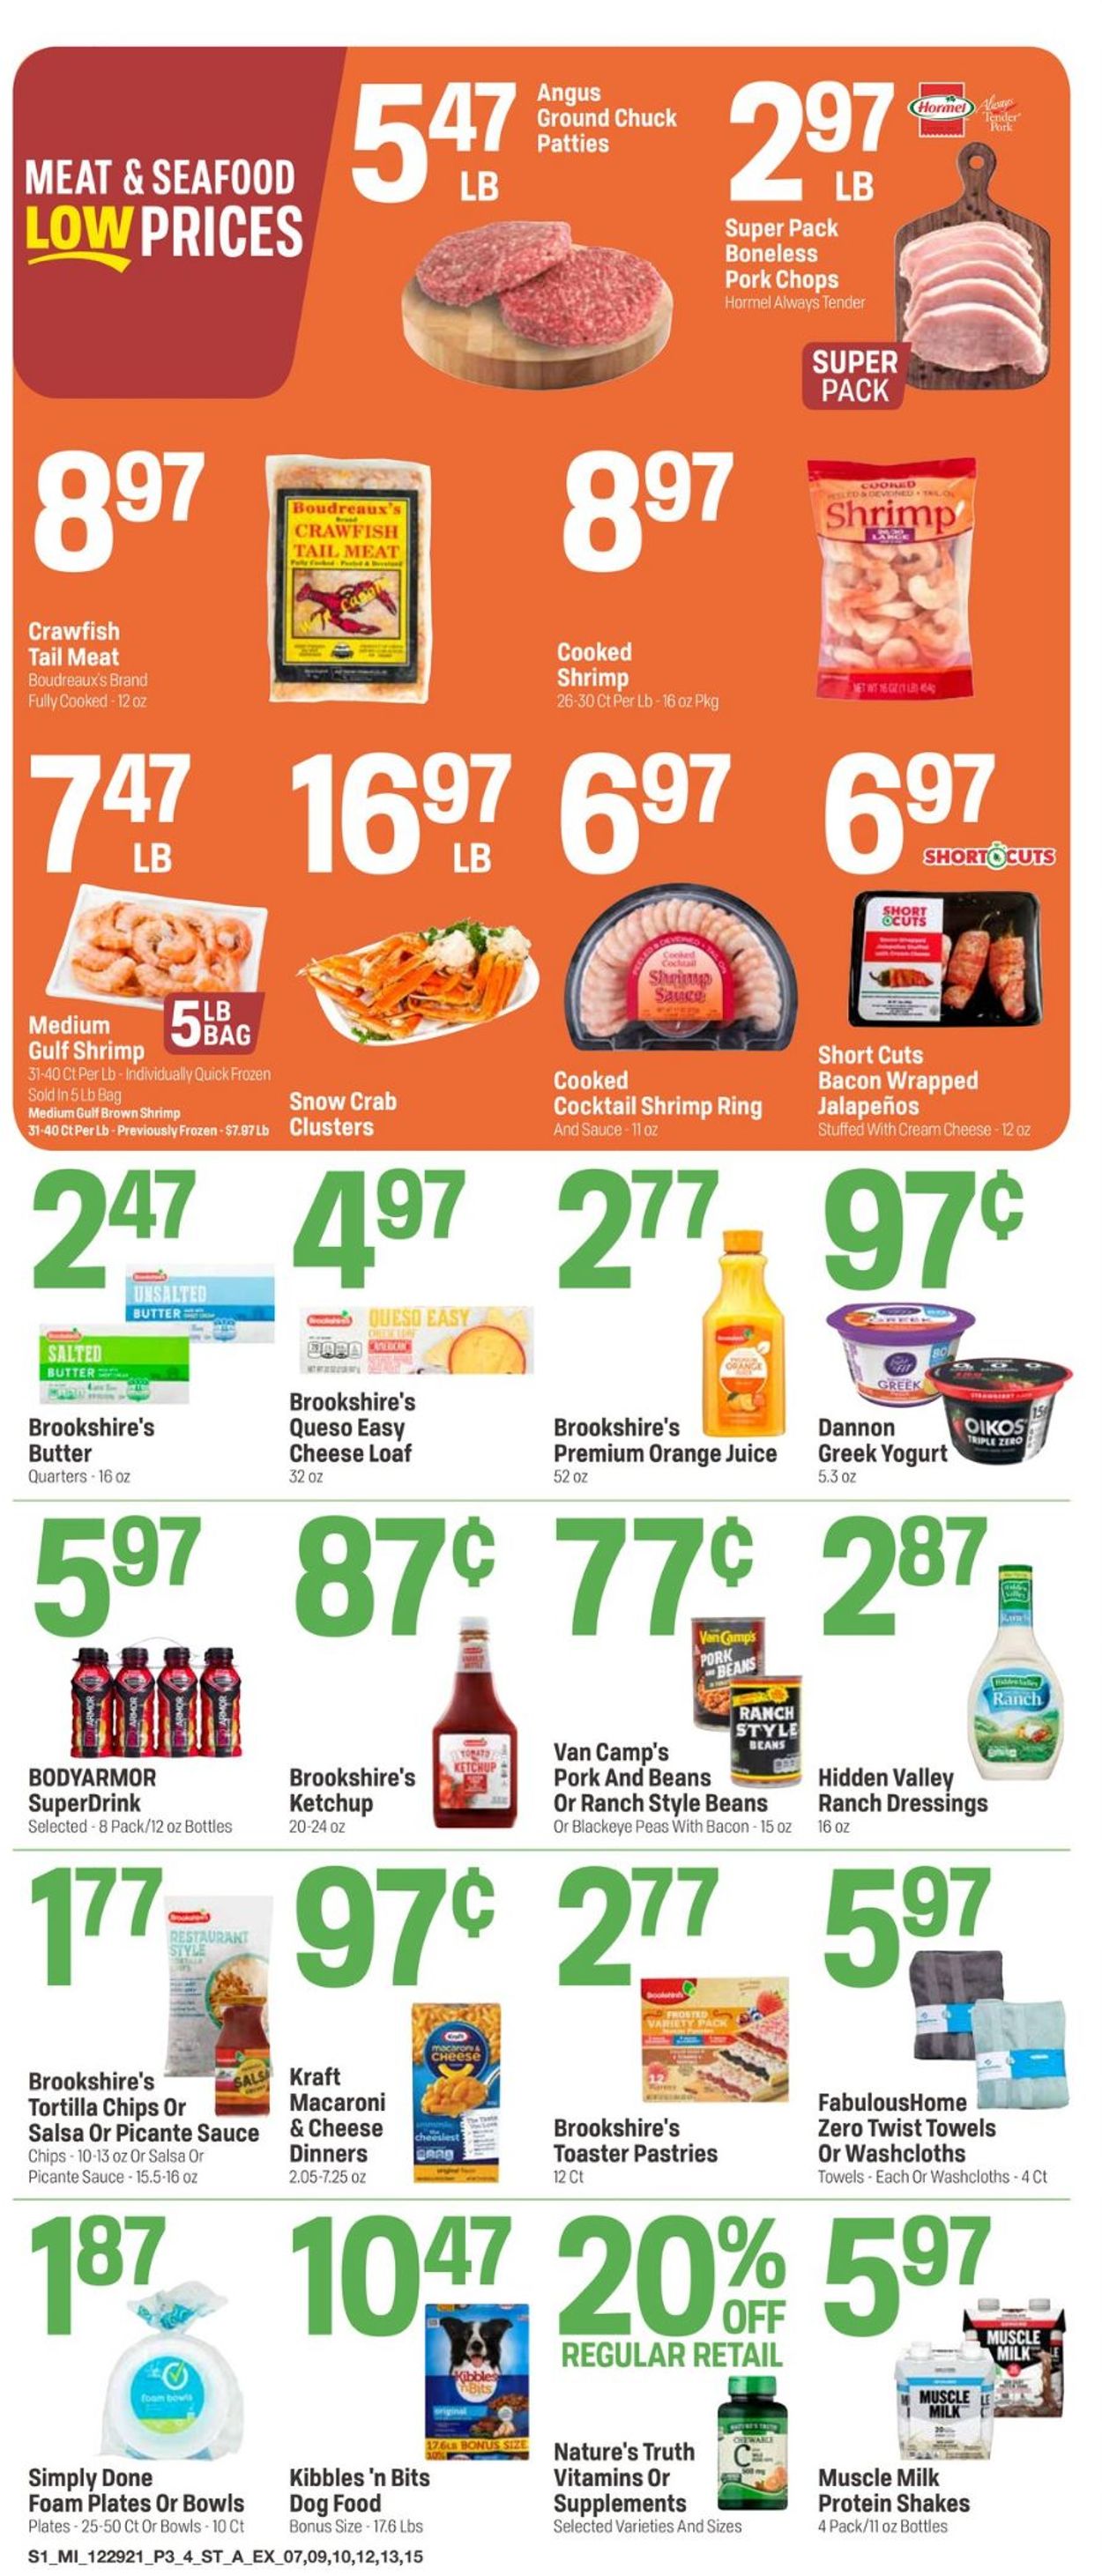 Catalogue Super 1 Foods from 12/29/2021